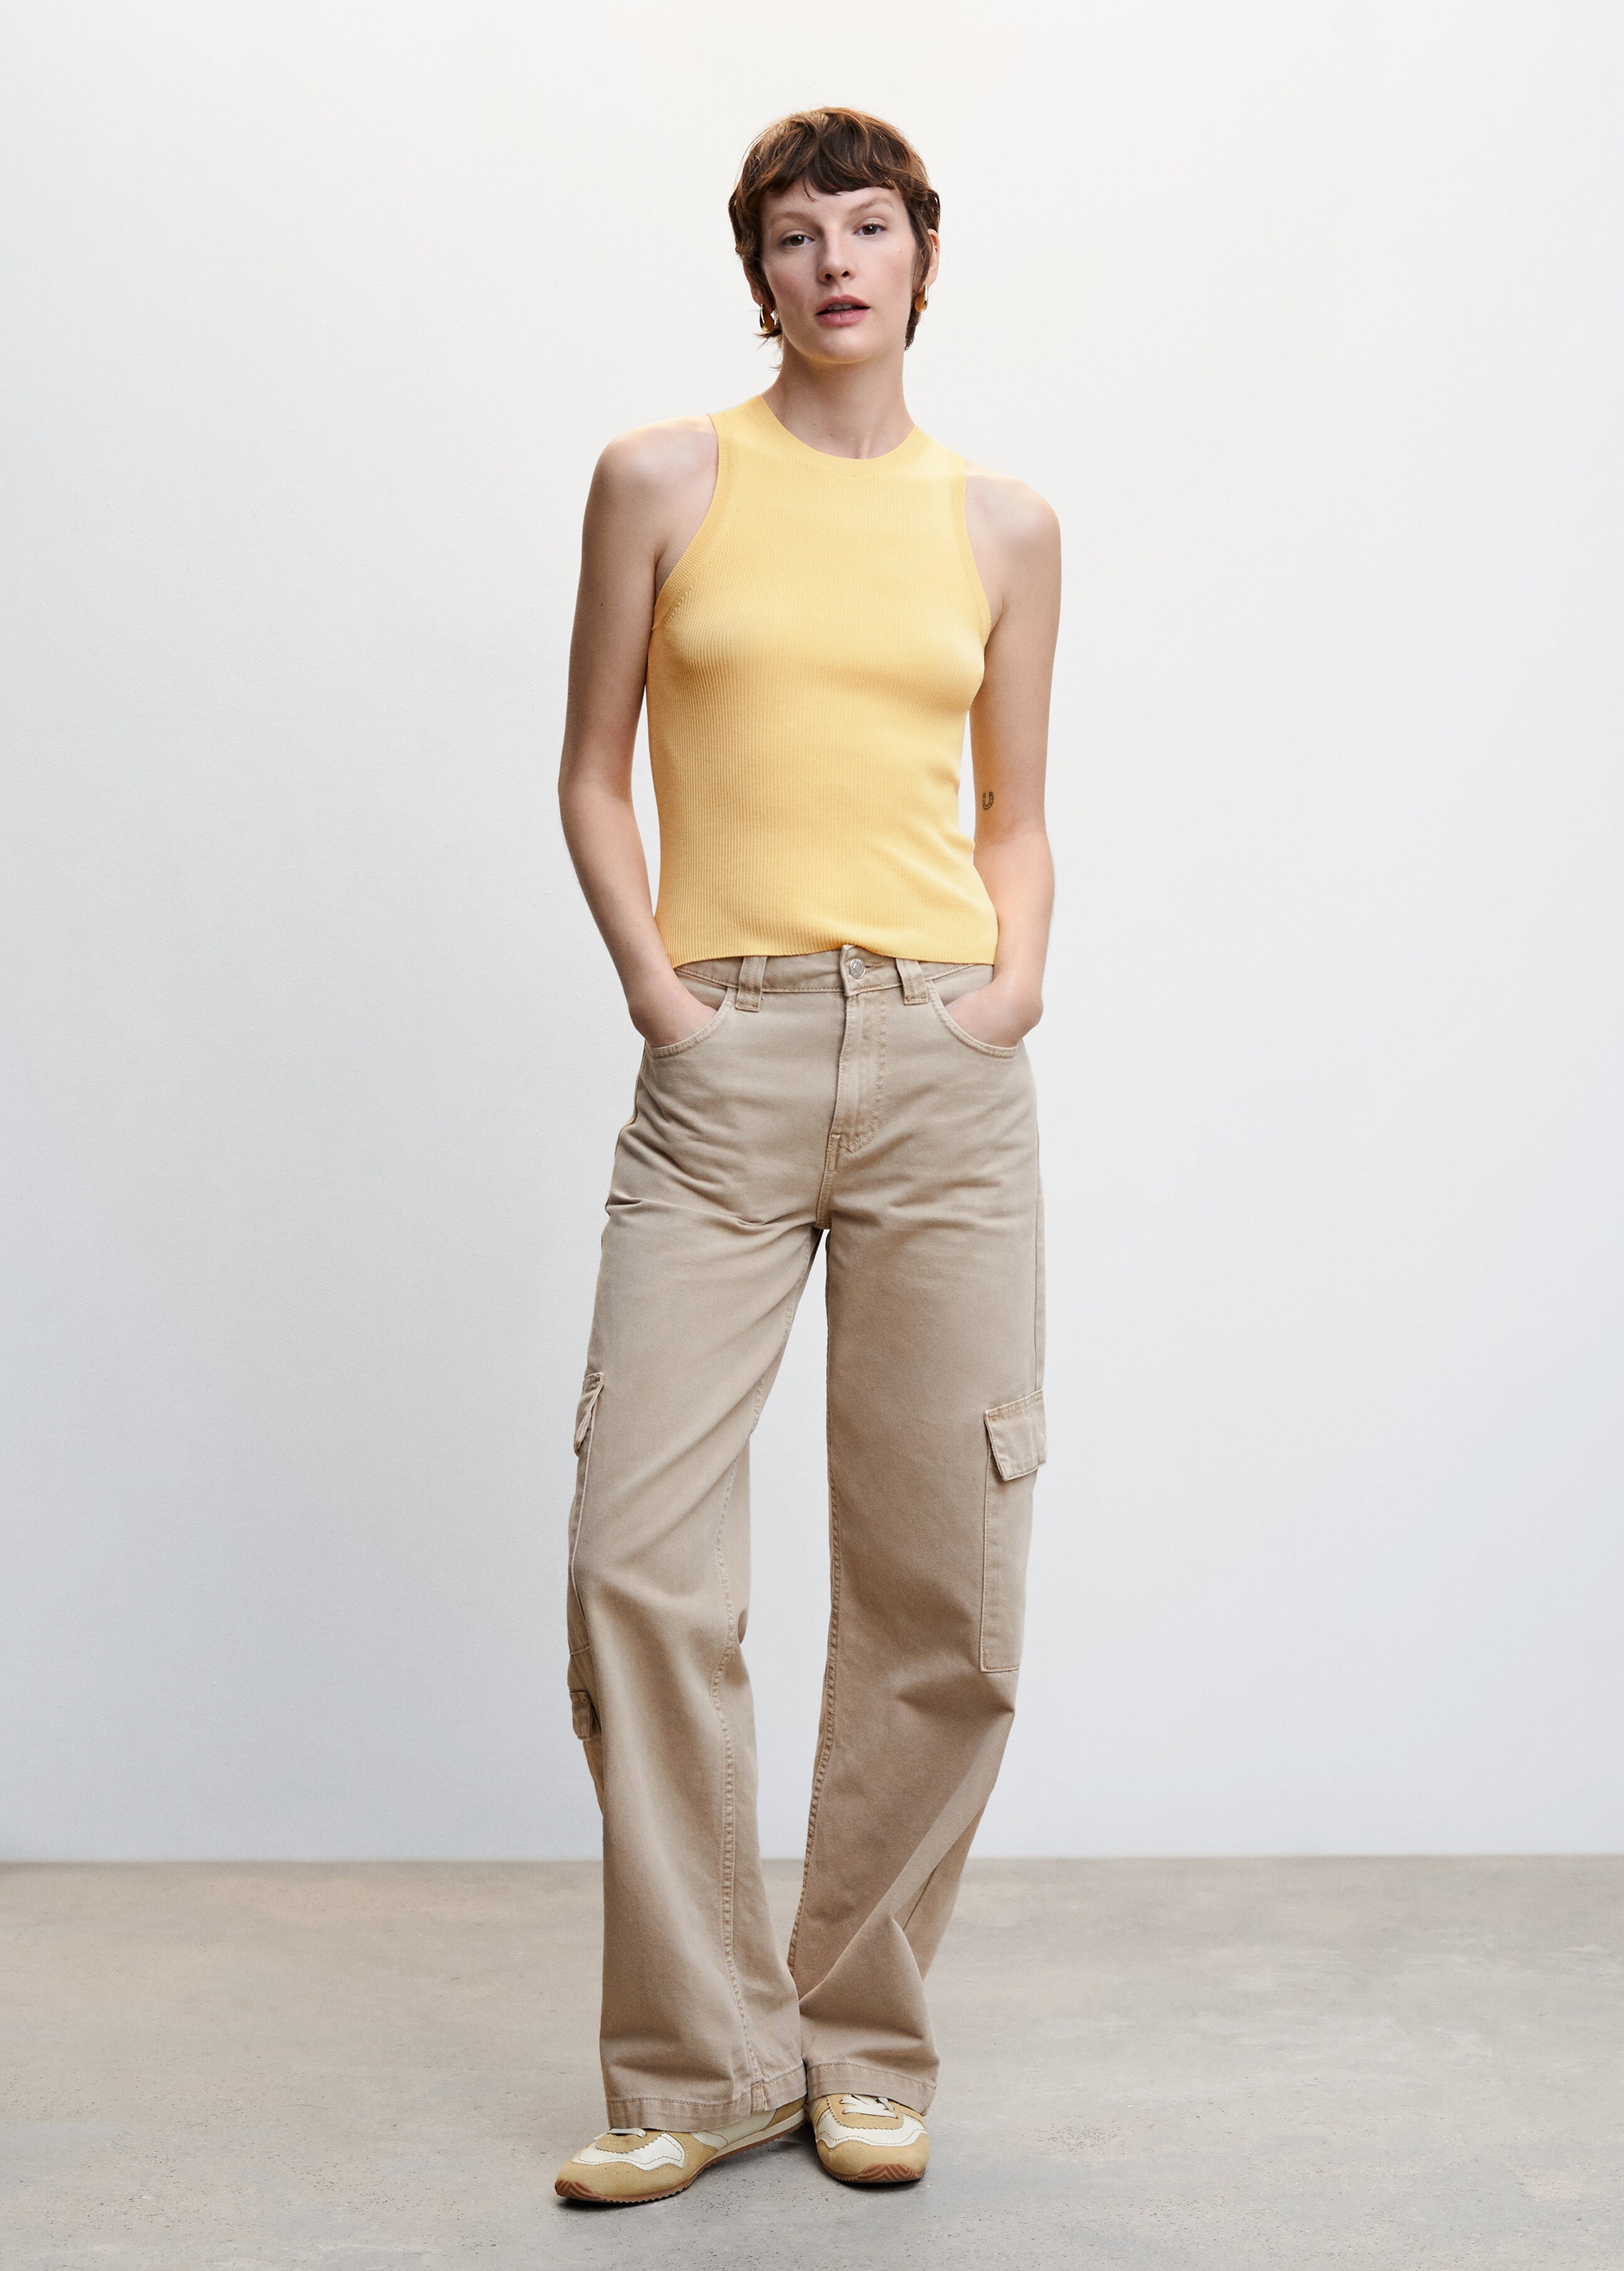 Knitted top with wide straps - General plane